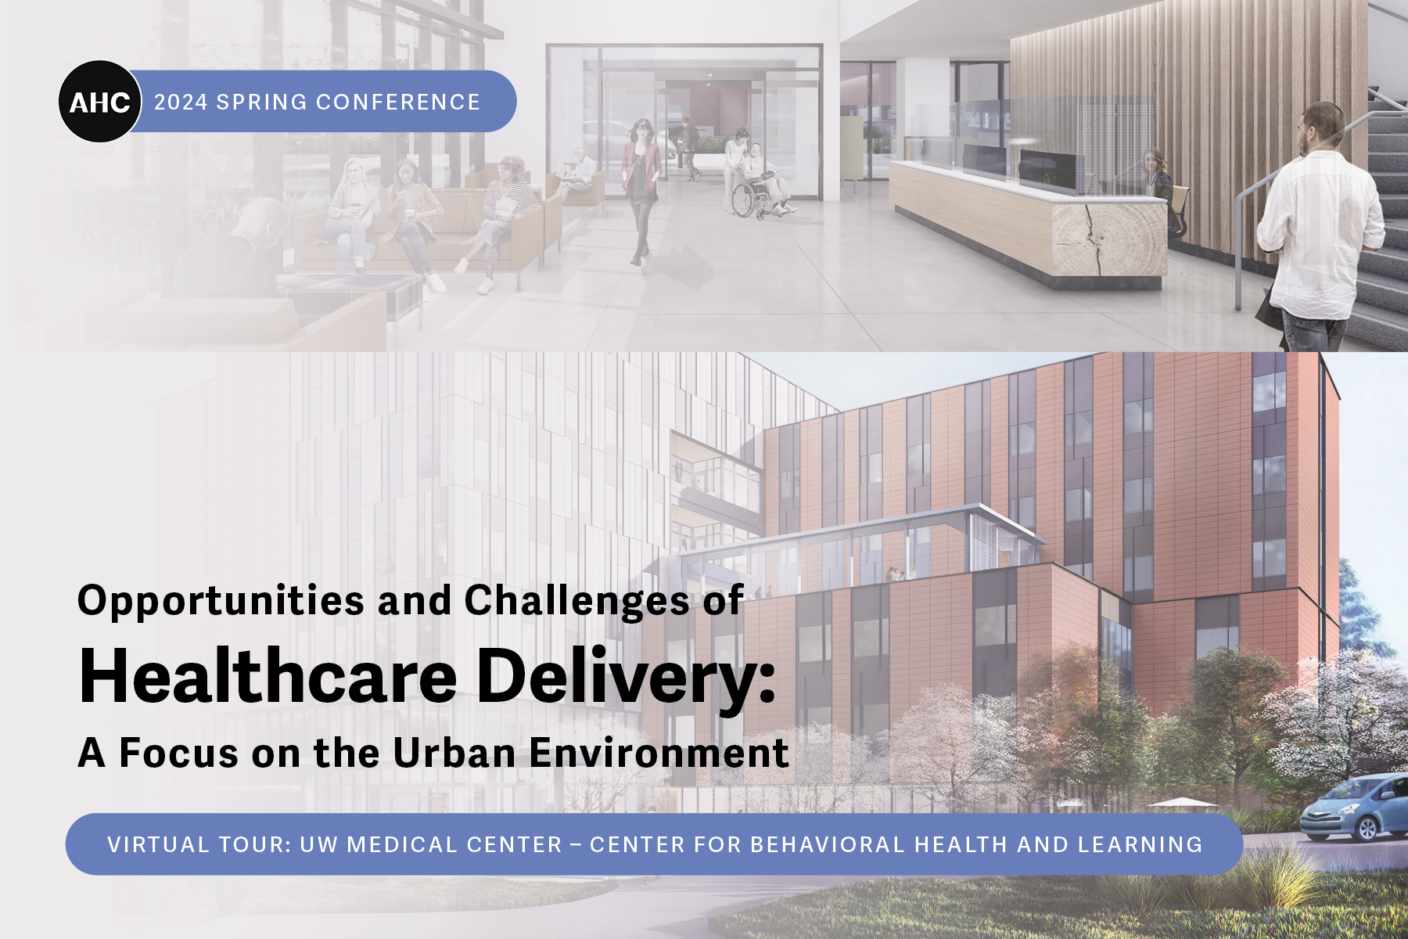 What factors are at play when planning and designing healthcare delivery facilities in the urban environment today?